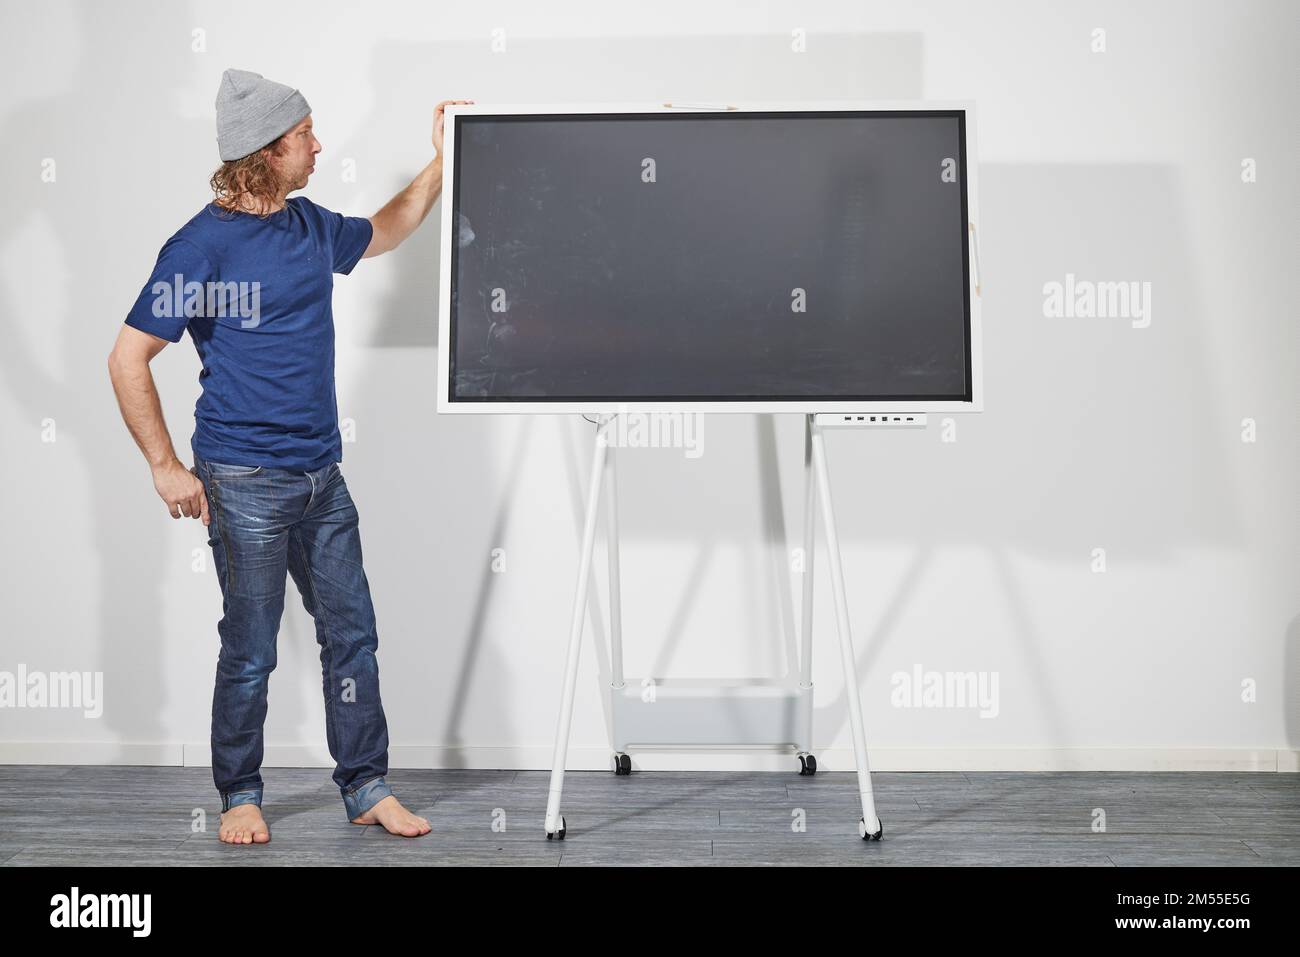 Man presenting in front of digital screen Stock Photo